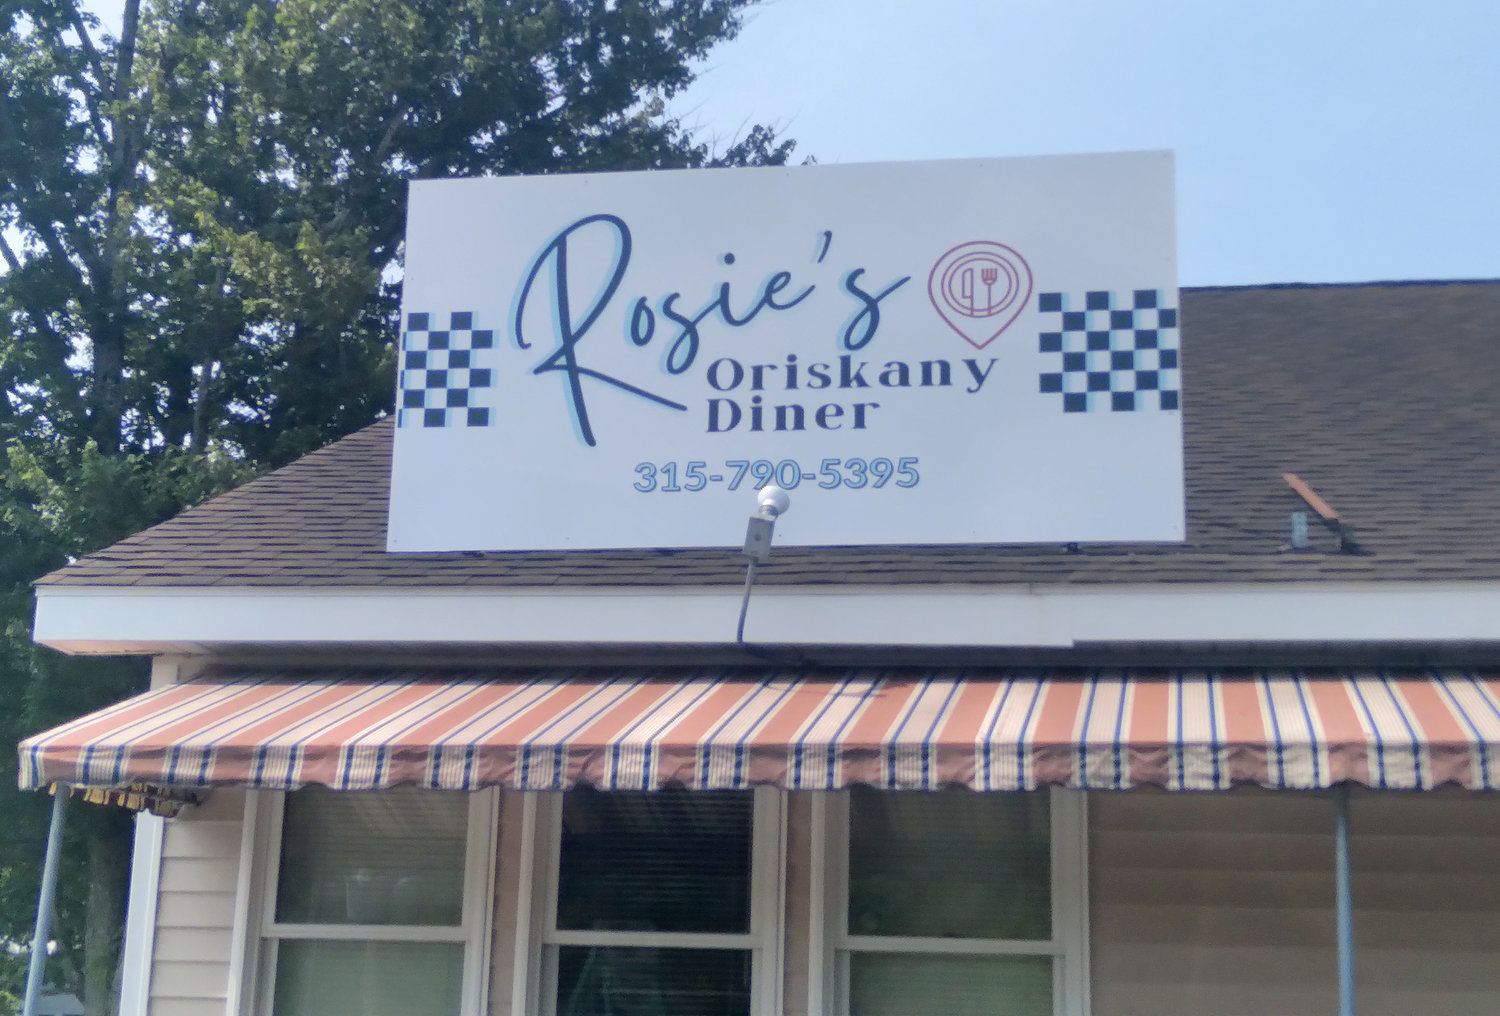 VILLAGE CHARM — Rosie’s Diner is a neighborhood spot in the village of Oriskany, population 1,200, known for its relaxed pace as well as its rich history.